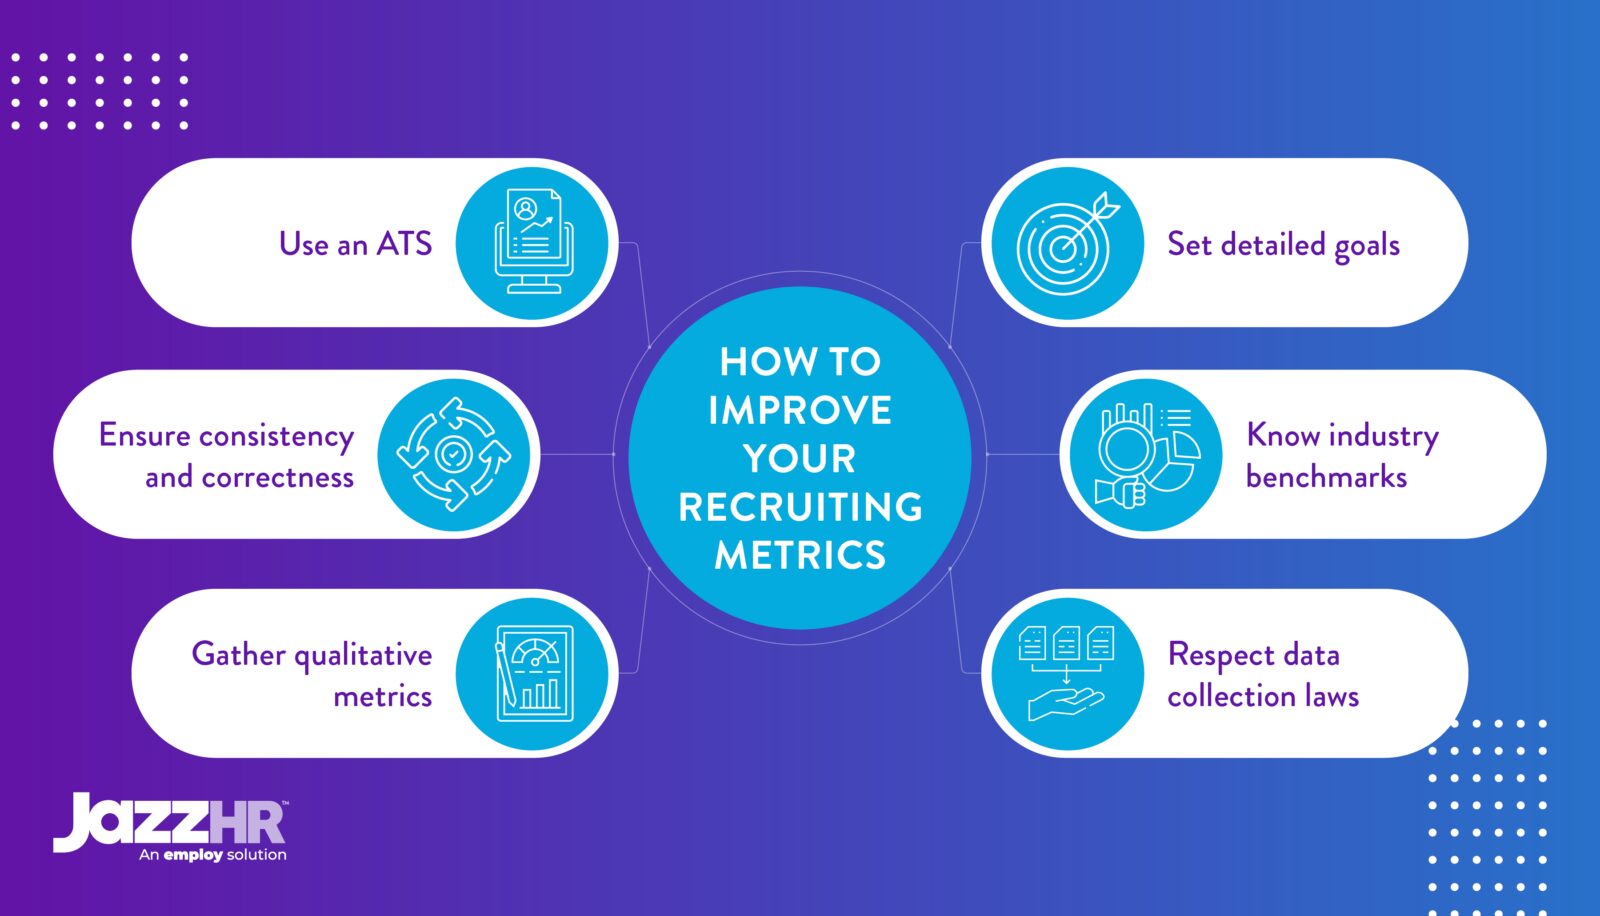 Common ways to improve recruiting metrics (as explained below)